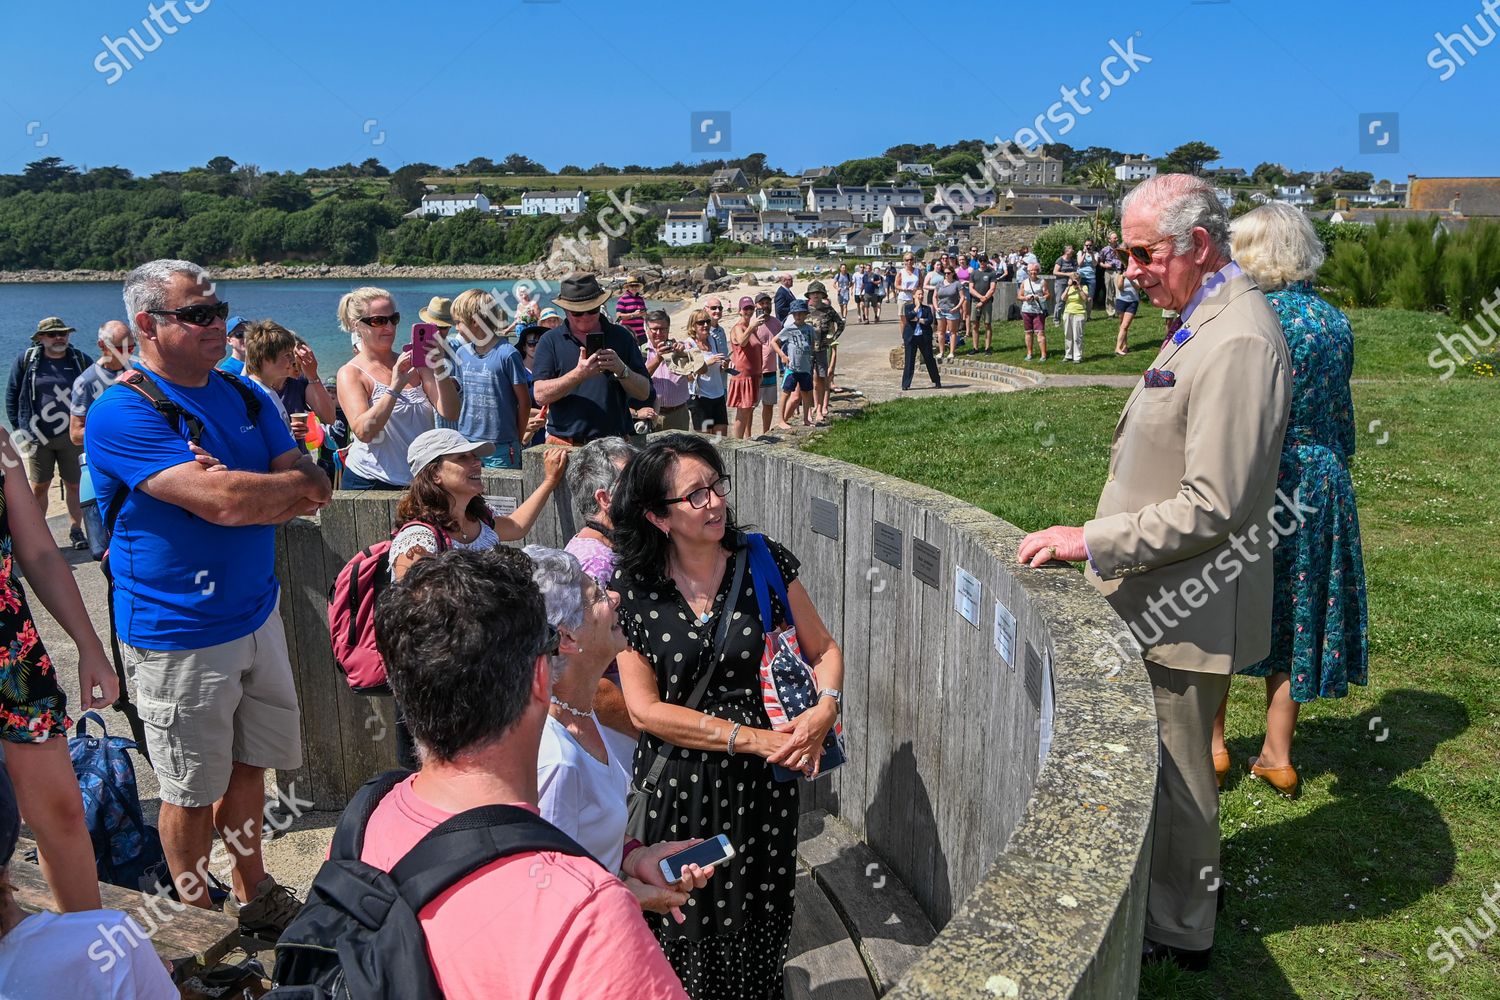 prince-charles-and-camilla-duchess-of-cornwall-visit-to-devon-and-cornwall-day-2-uk-shutterstock-editorial-12222608at.jpg